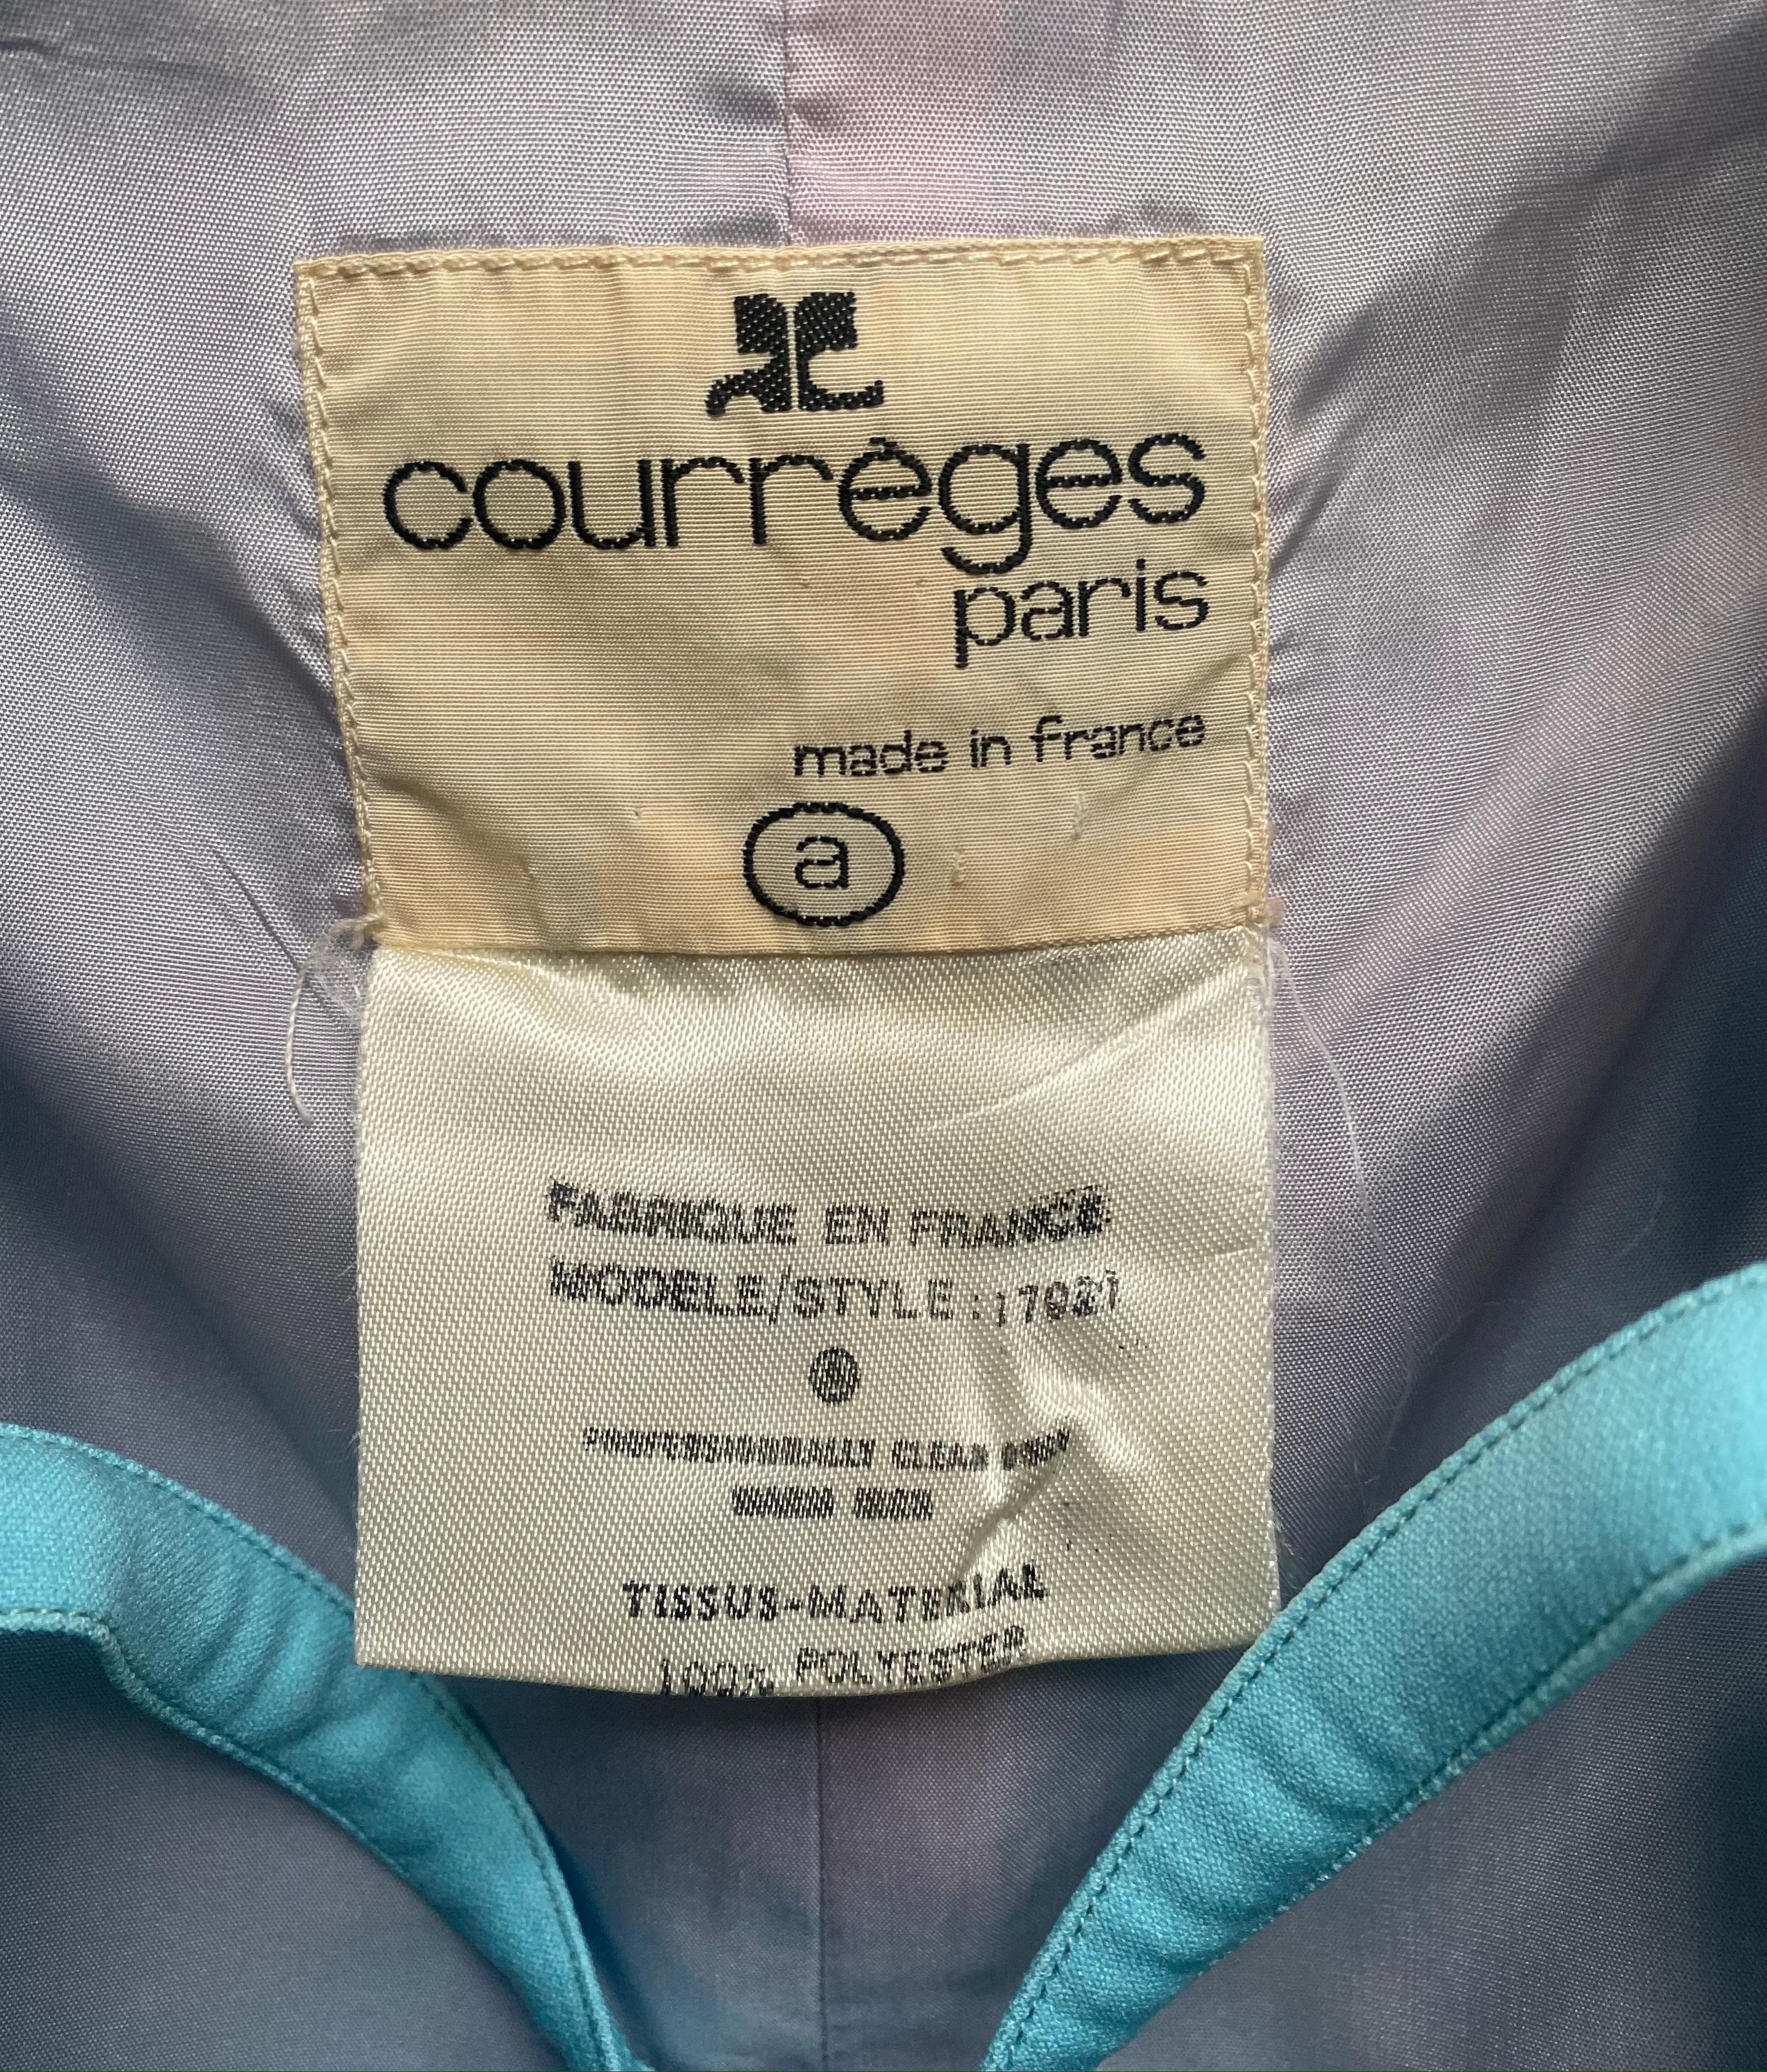 1971 Documented Courreges Turquoise Maxi Dress For Sale 3